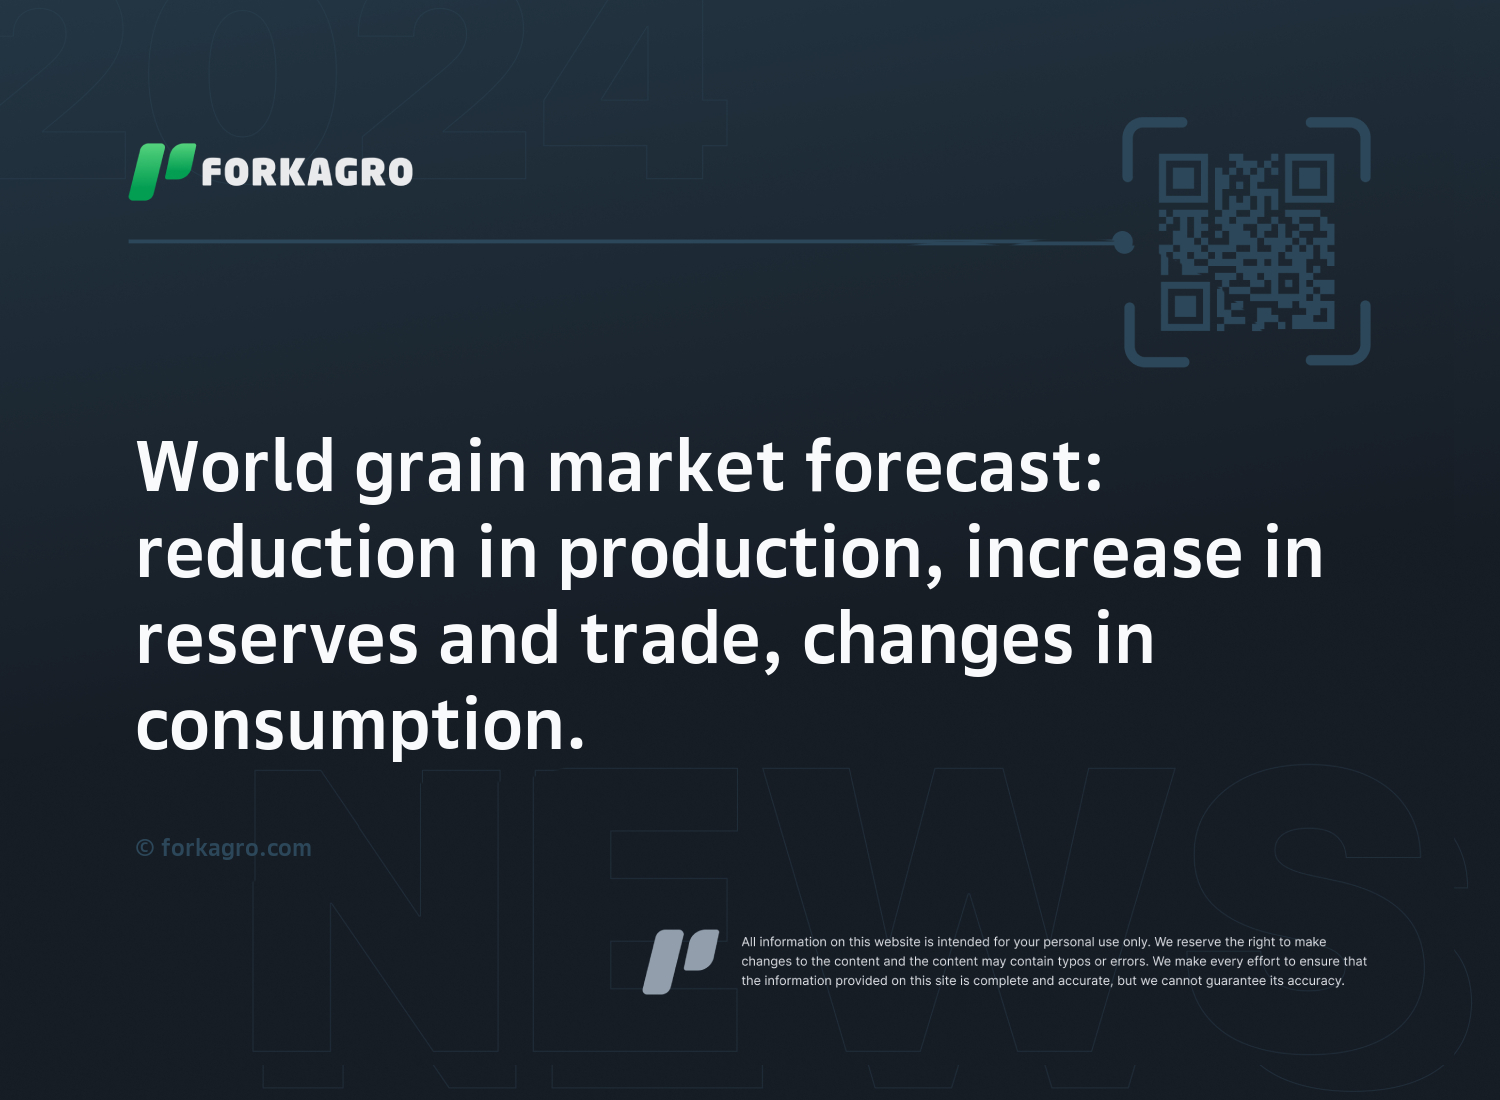 World grain market forecast: reduction in production, increase in reserves and trade, changes in consumption.